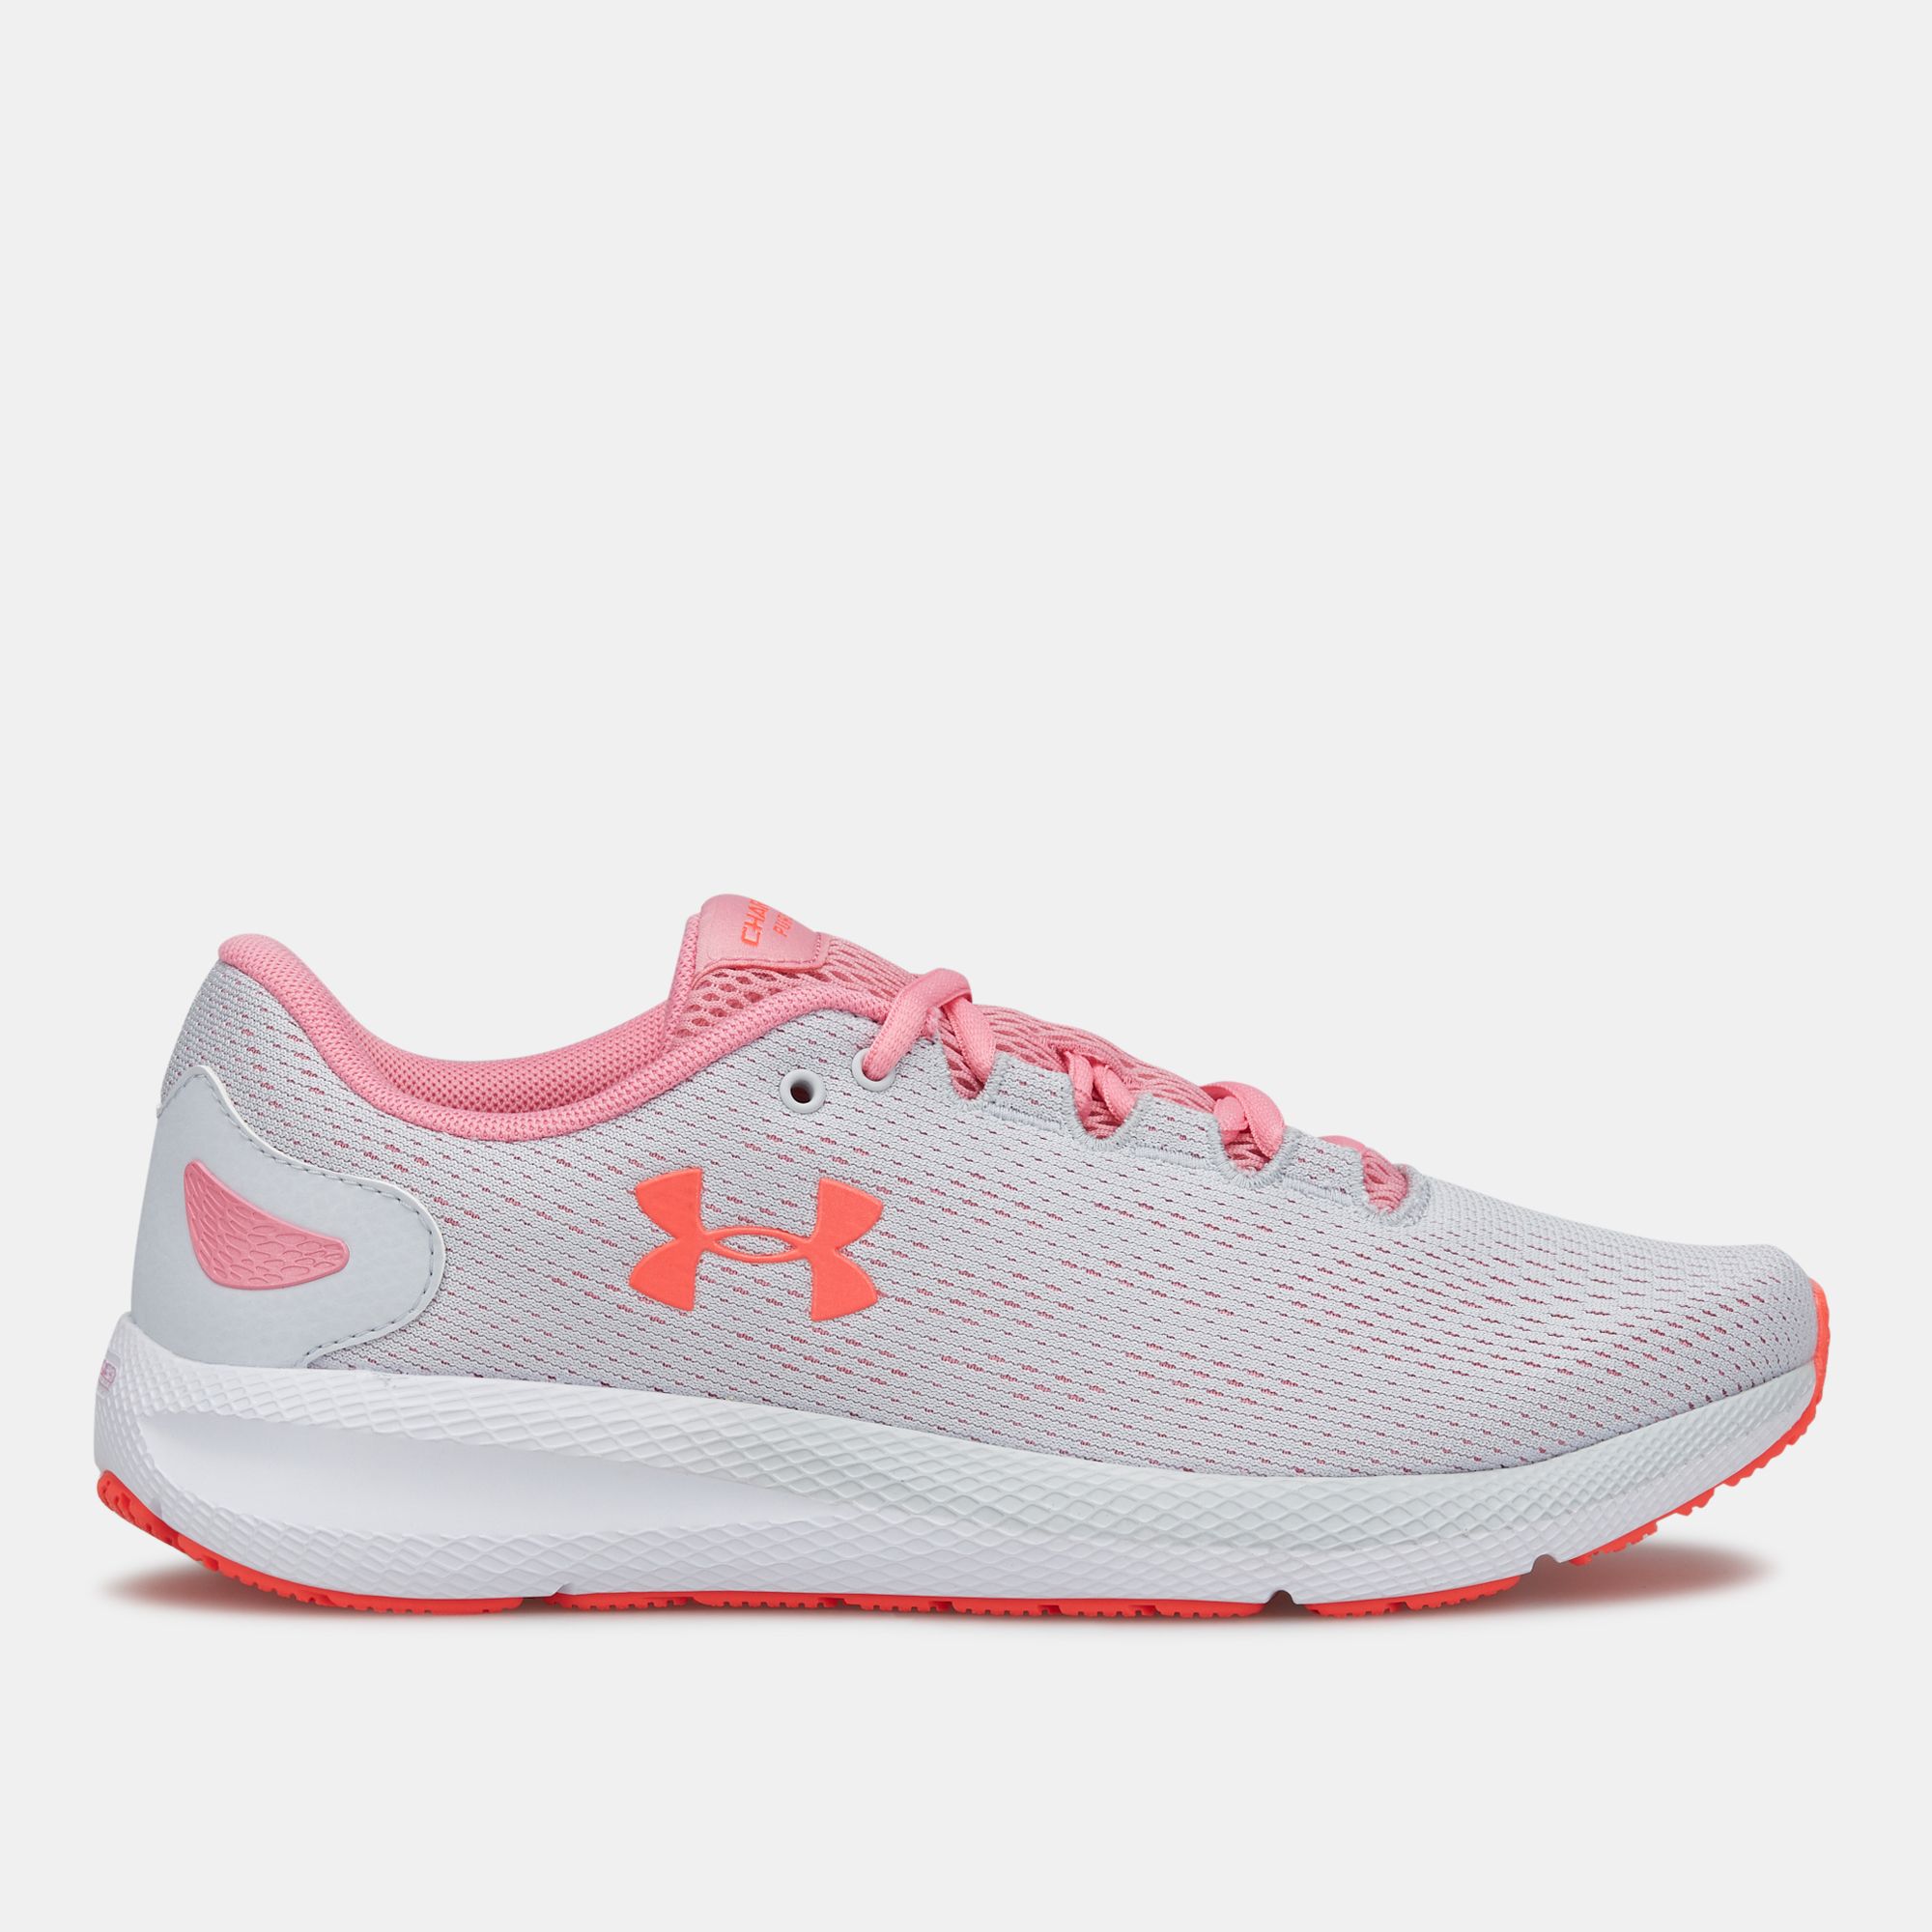 women's charged under armour shoes